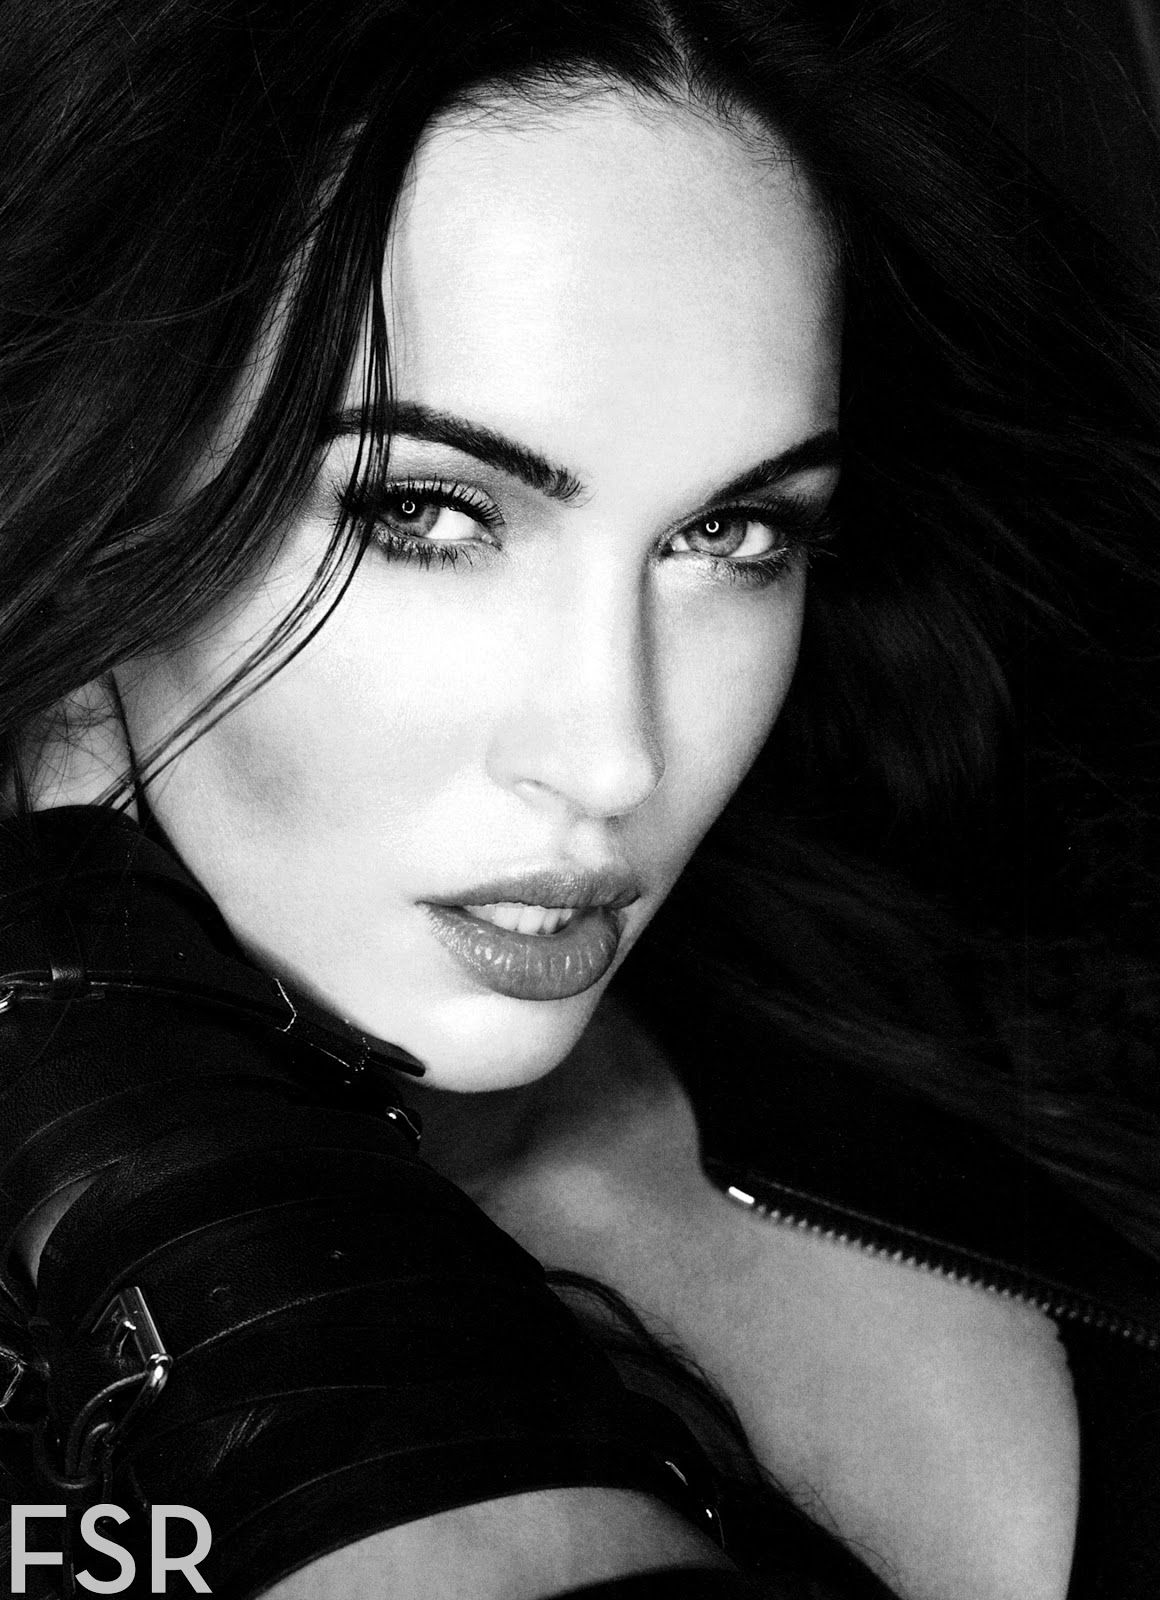 fashion_scans_remastered-megan_fox-esquire_usa-february_2013-scanned_by_vampirehorde-hq-3